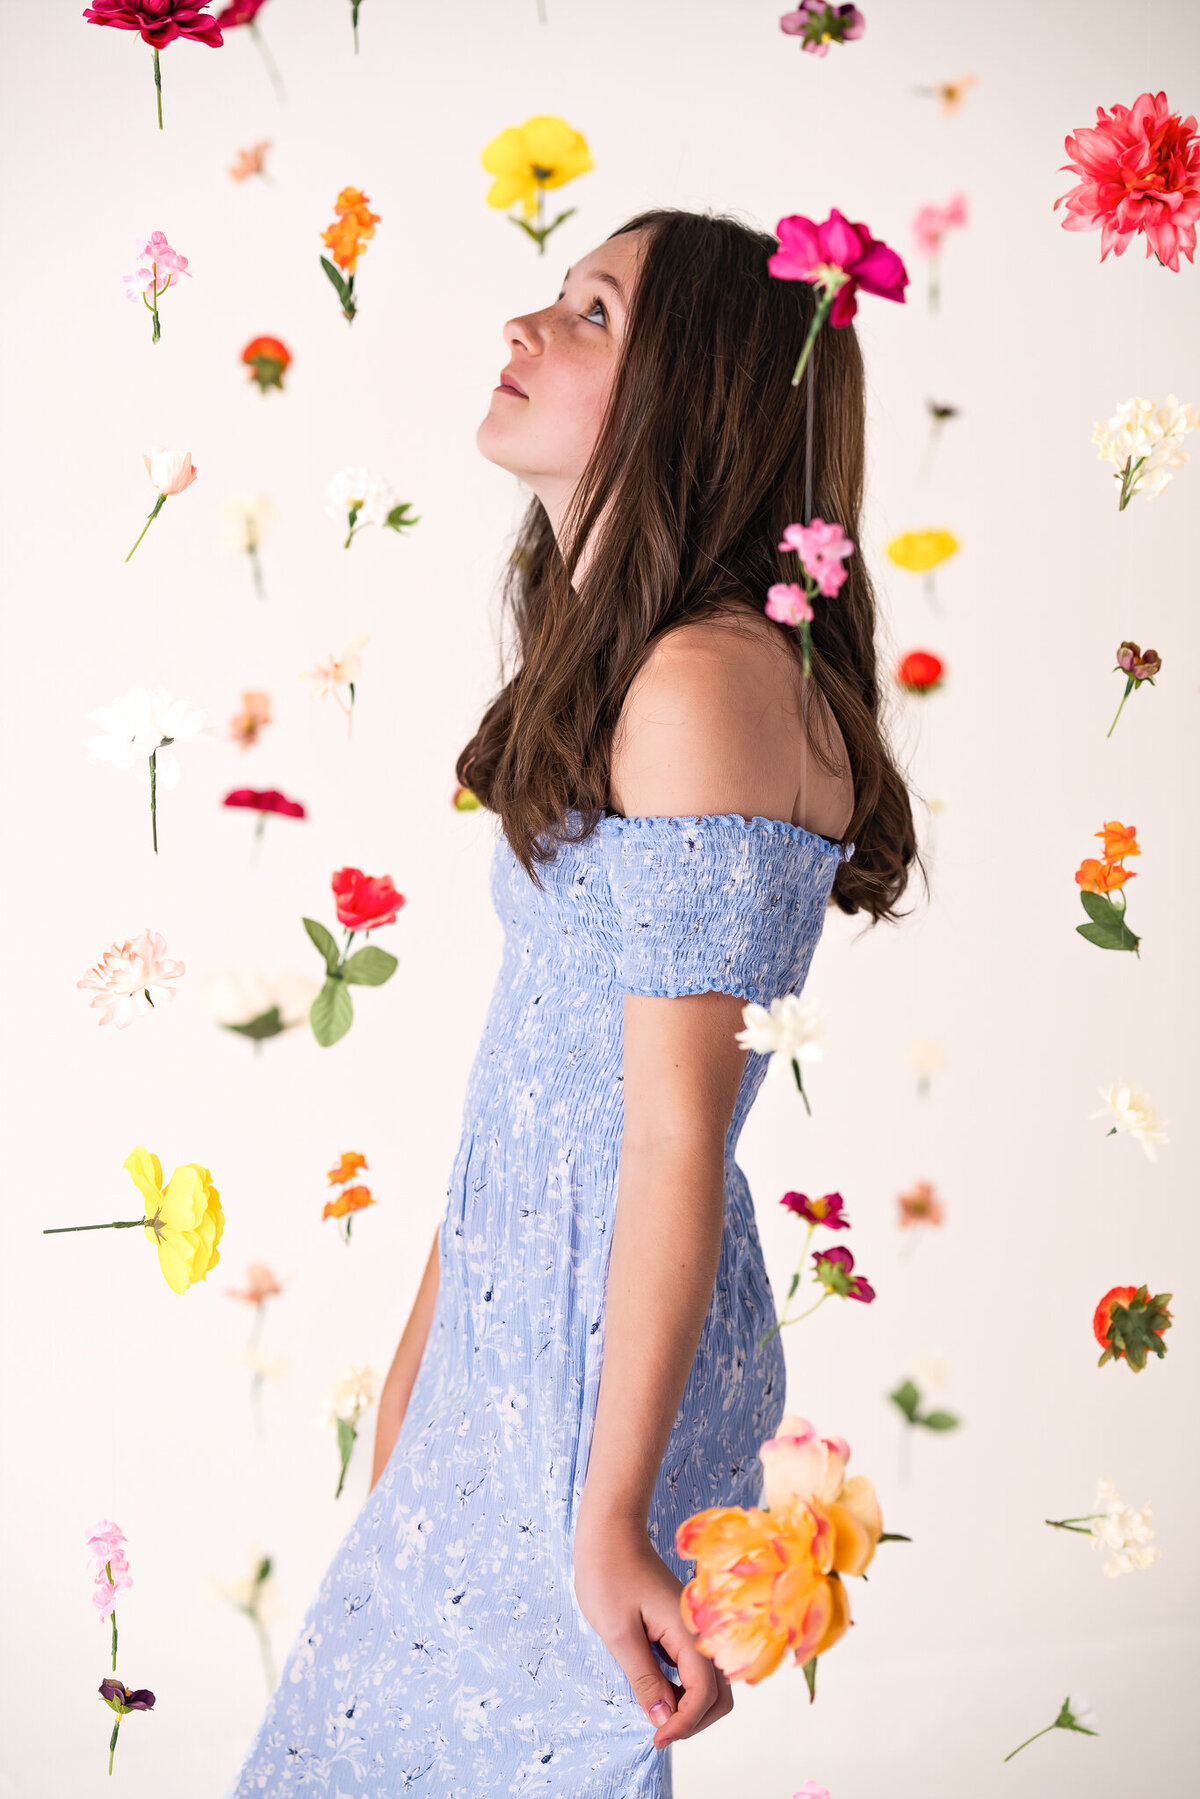 A teen girl in a blue dress is doing a photoshoot in a studio with hanging flowers.